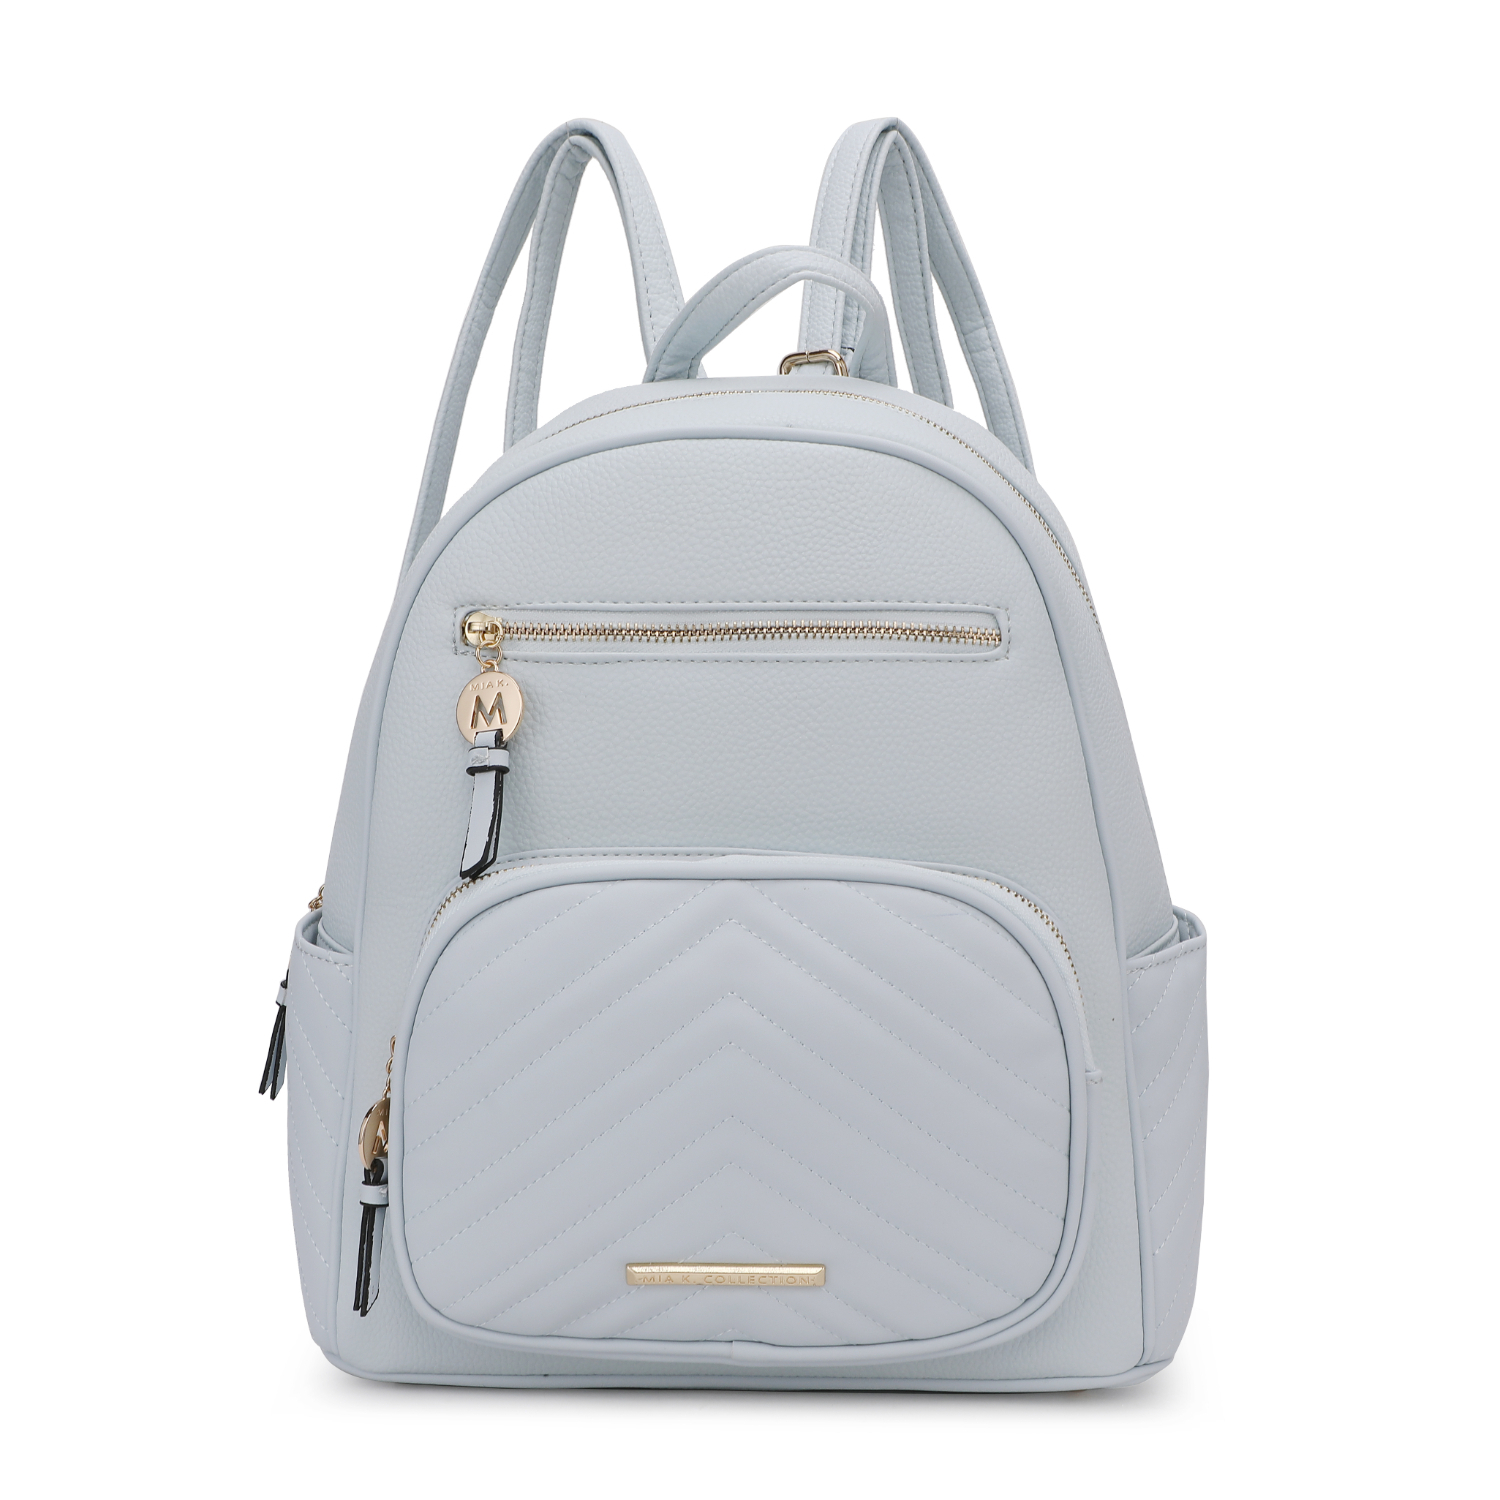 MKF Collection Romana Vegan Leather Womens Backpack By Mia K - Light Blue